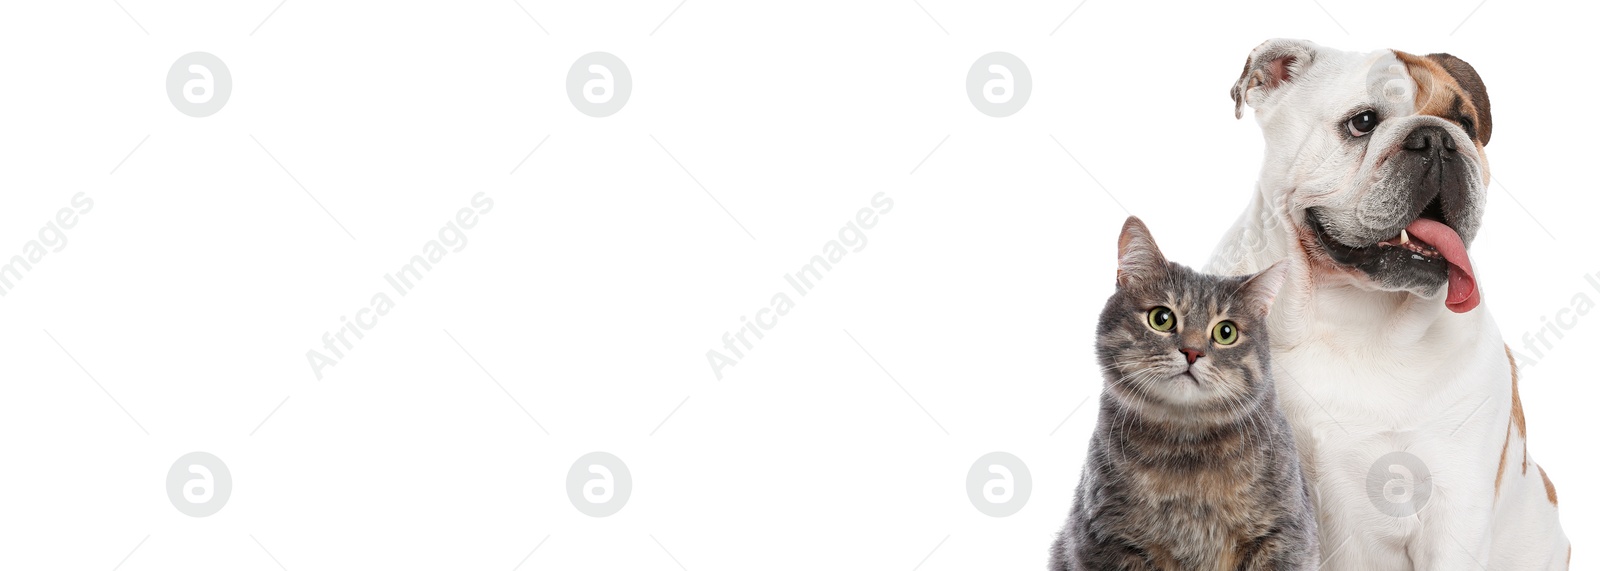 Image of Cute gray tabby cat and funny English bulldog on white background. Banner design with space for text